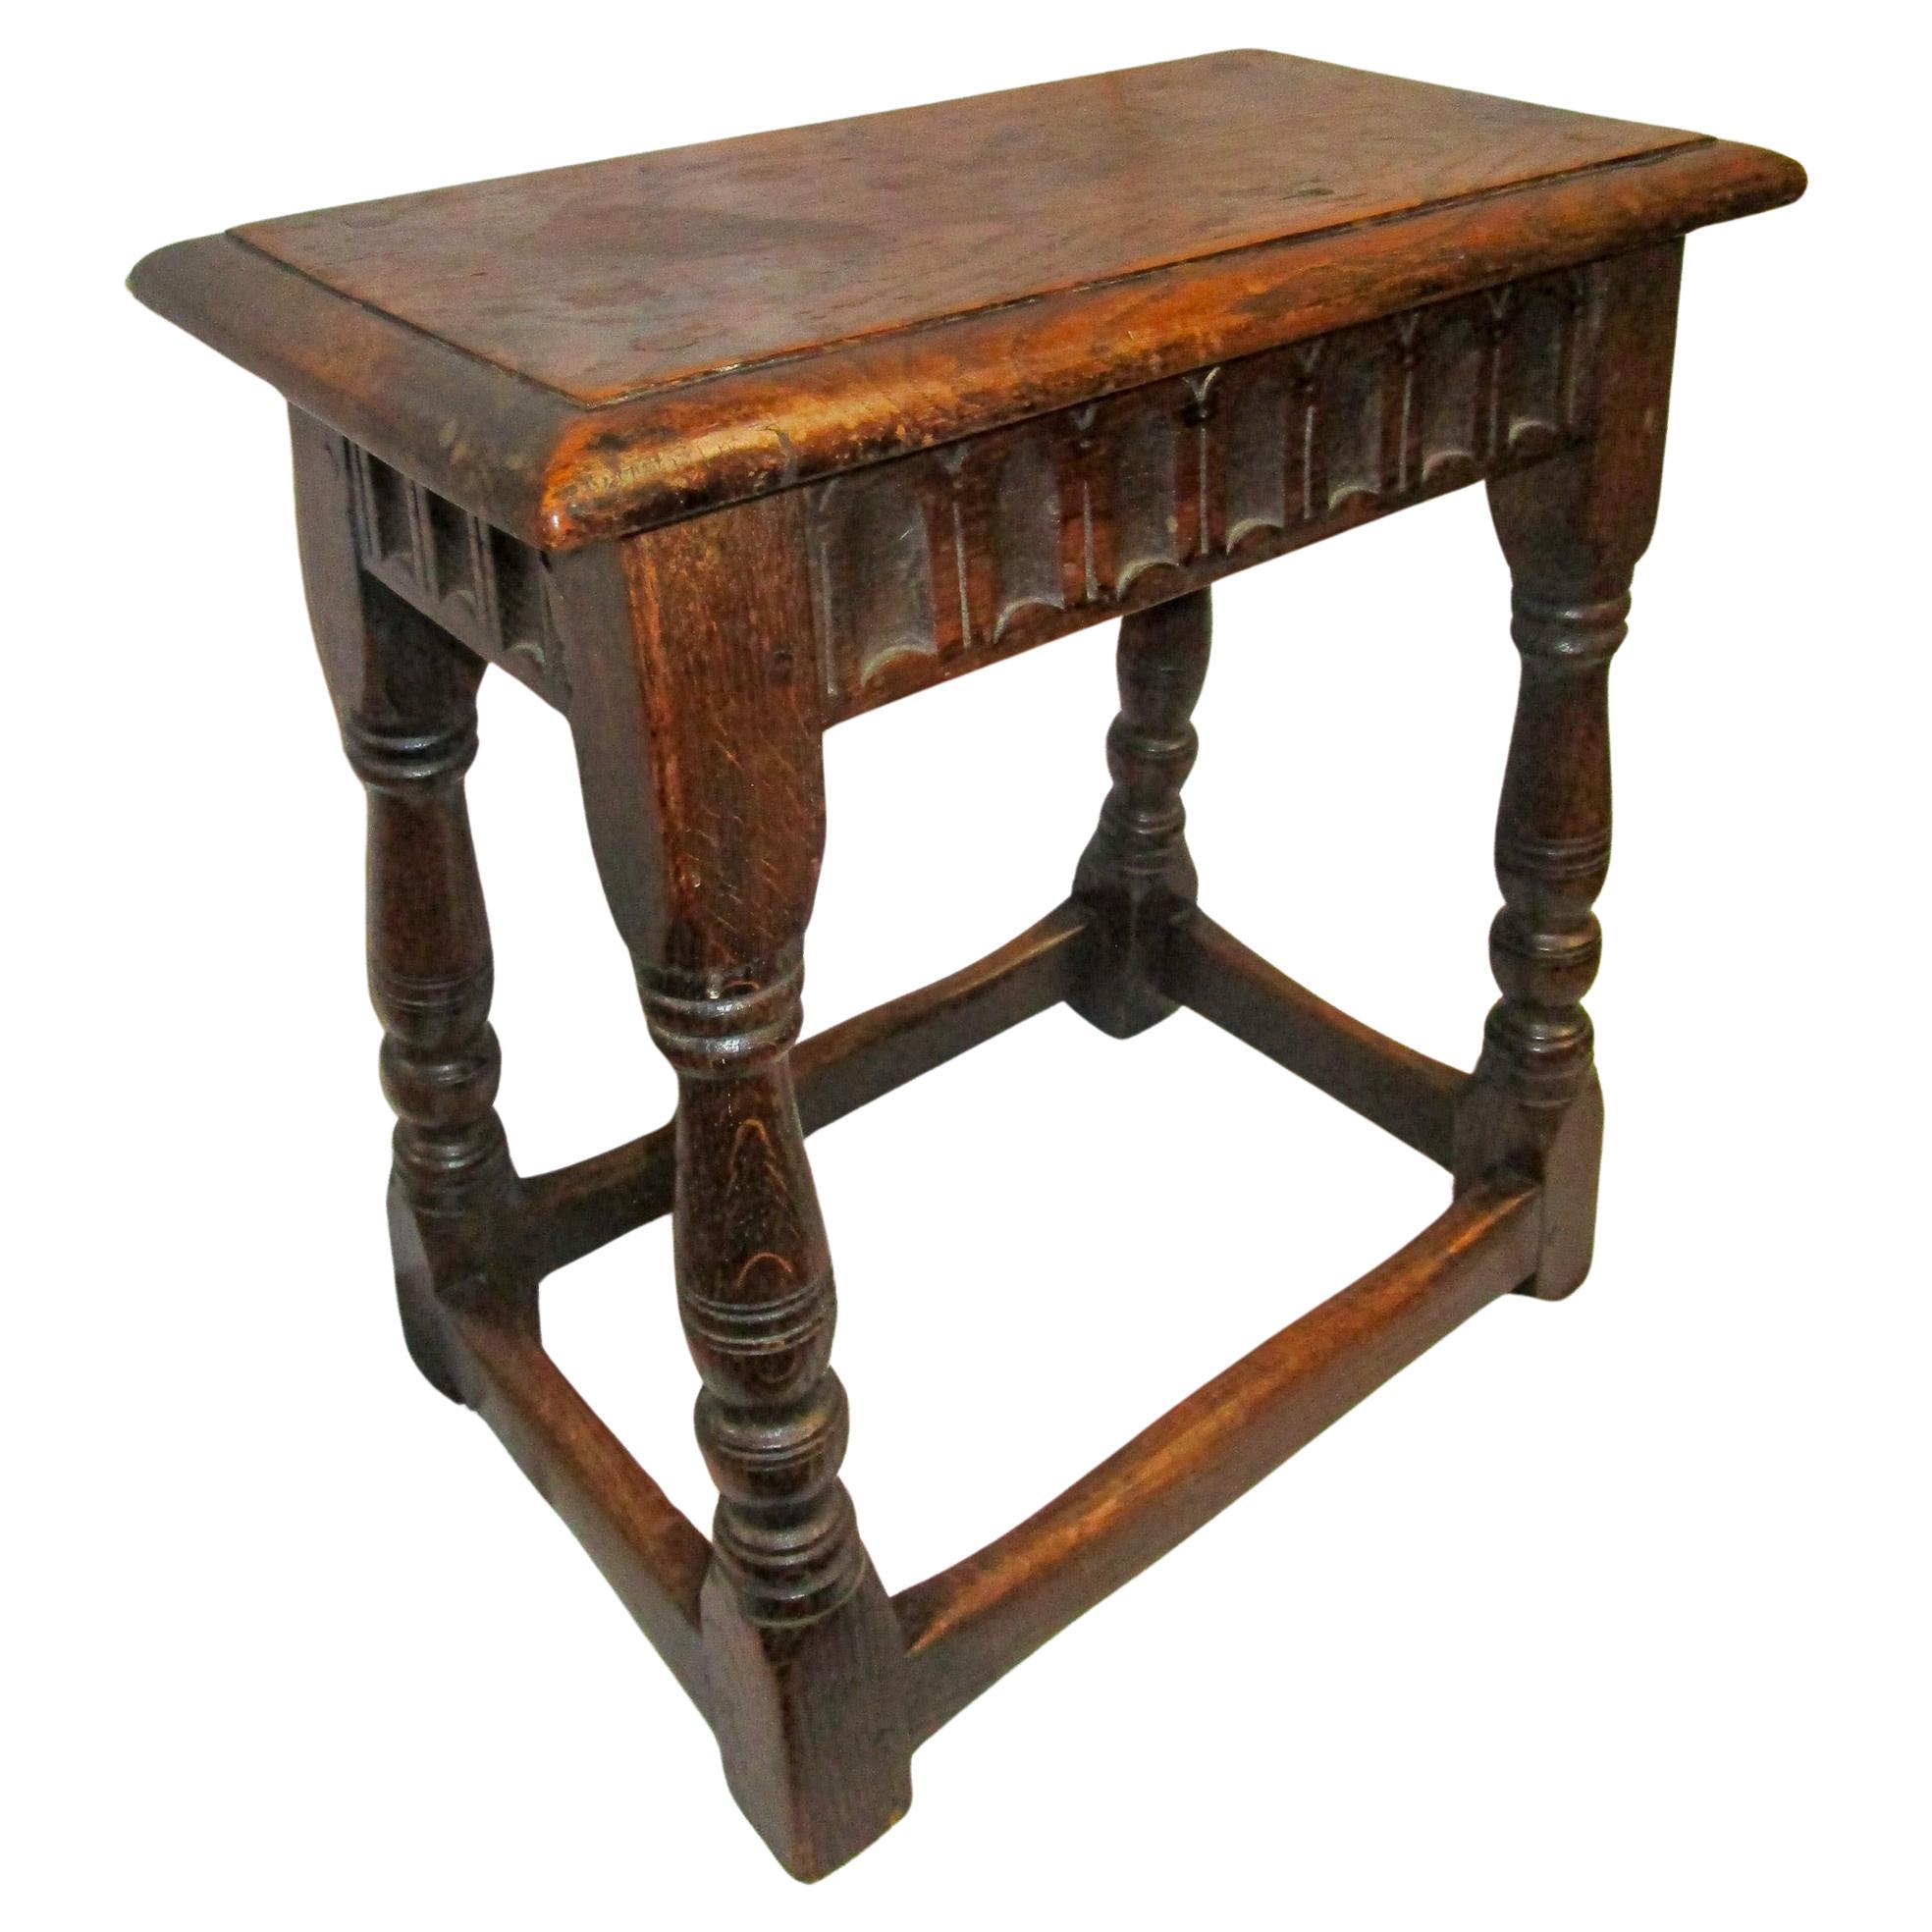 Early 18thc English Carved Oak Joint Stool with Pegged Construction